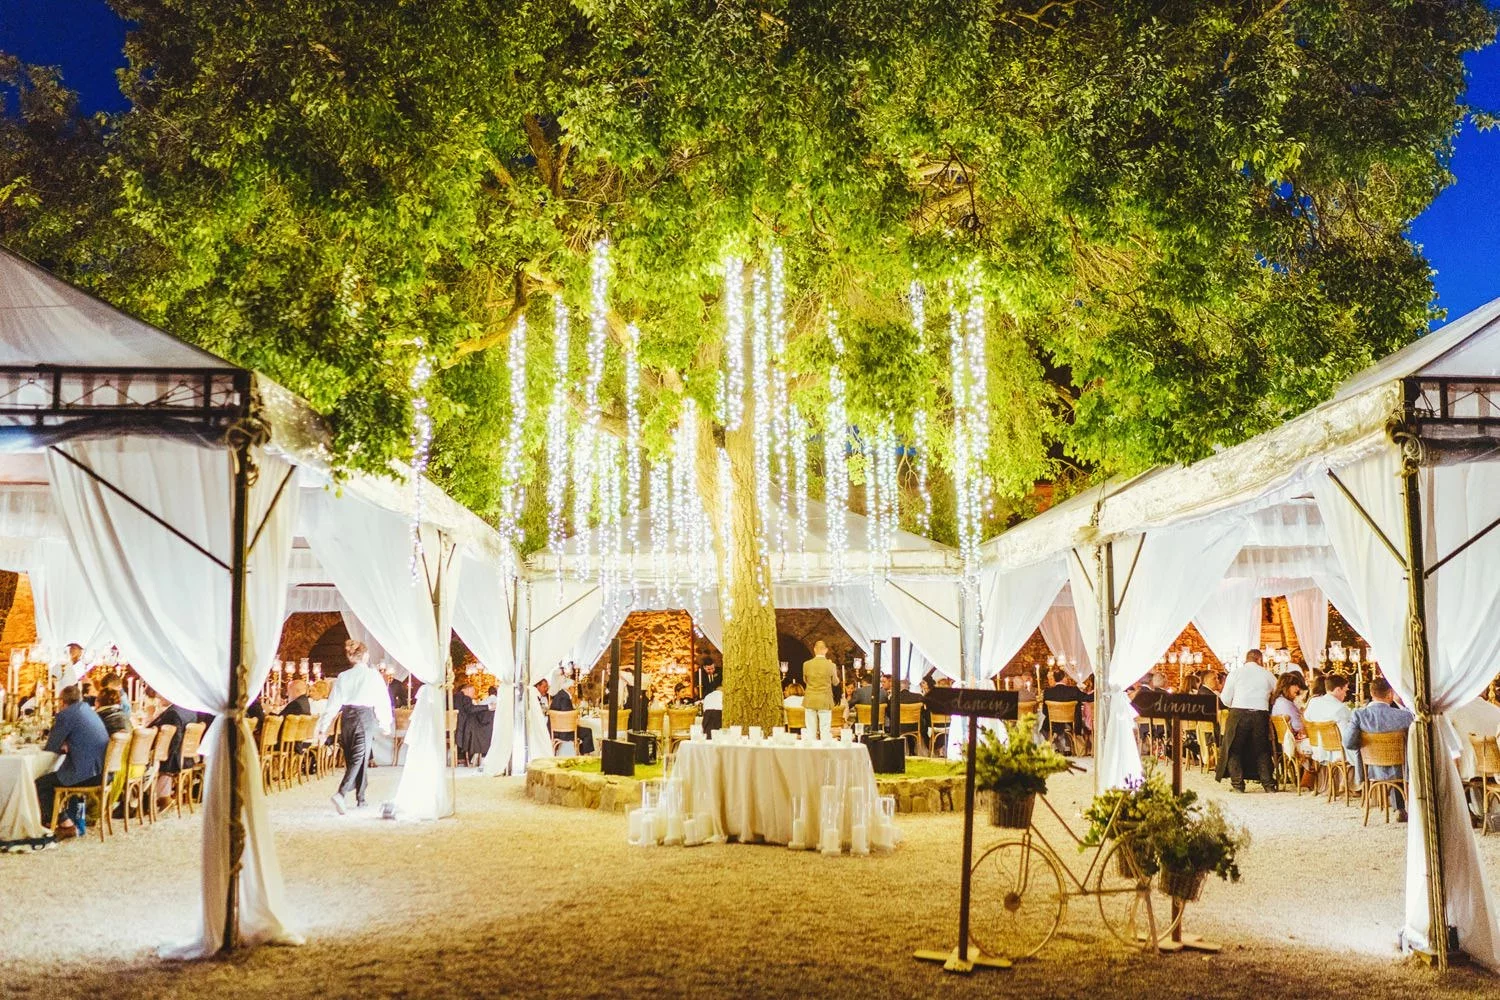 Beautiful lights hang from trees as evening falls upon a wedding celebration at Borgo Di Castelvecchio, one of the most popular wedding venues in Europe.